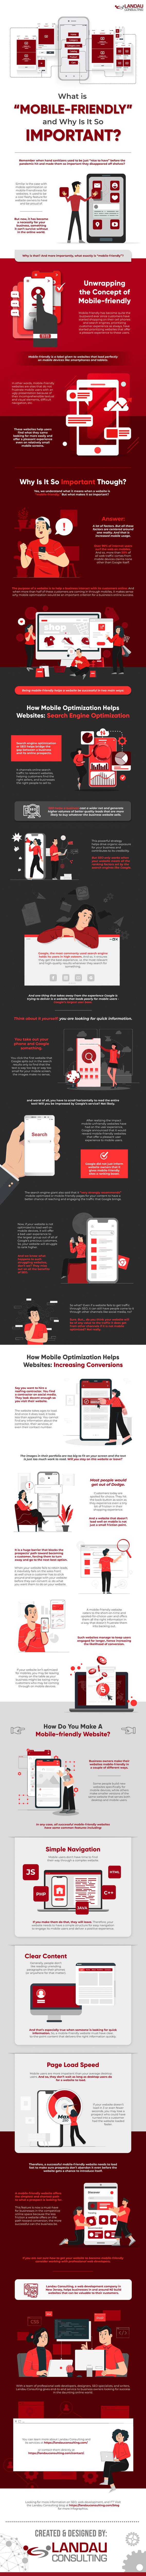 What-is-Mobile-friendly-and-Why-Is-It-So-Important?-infographic-image